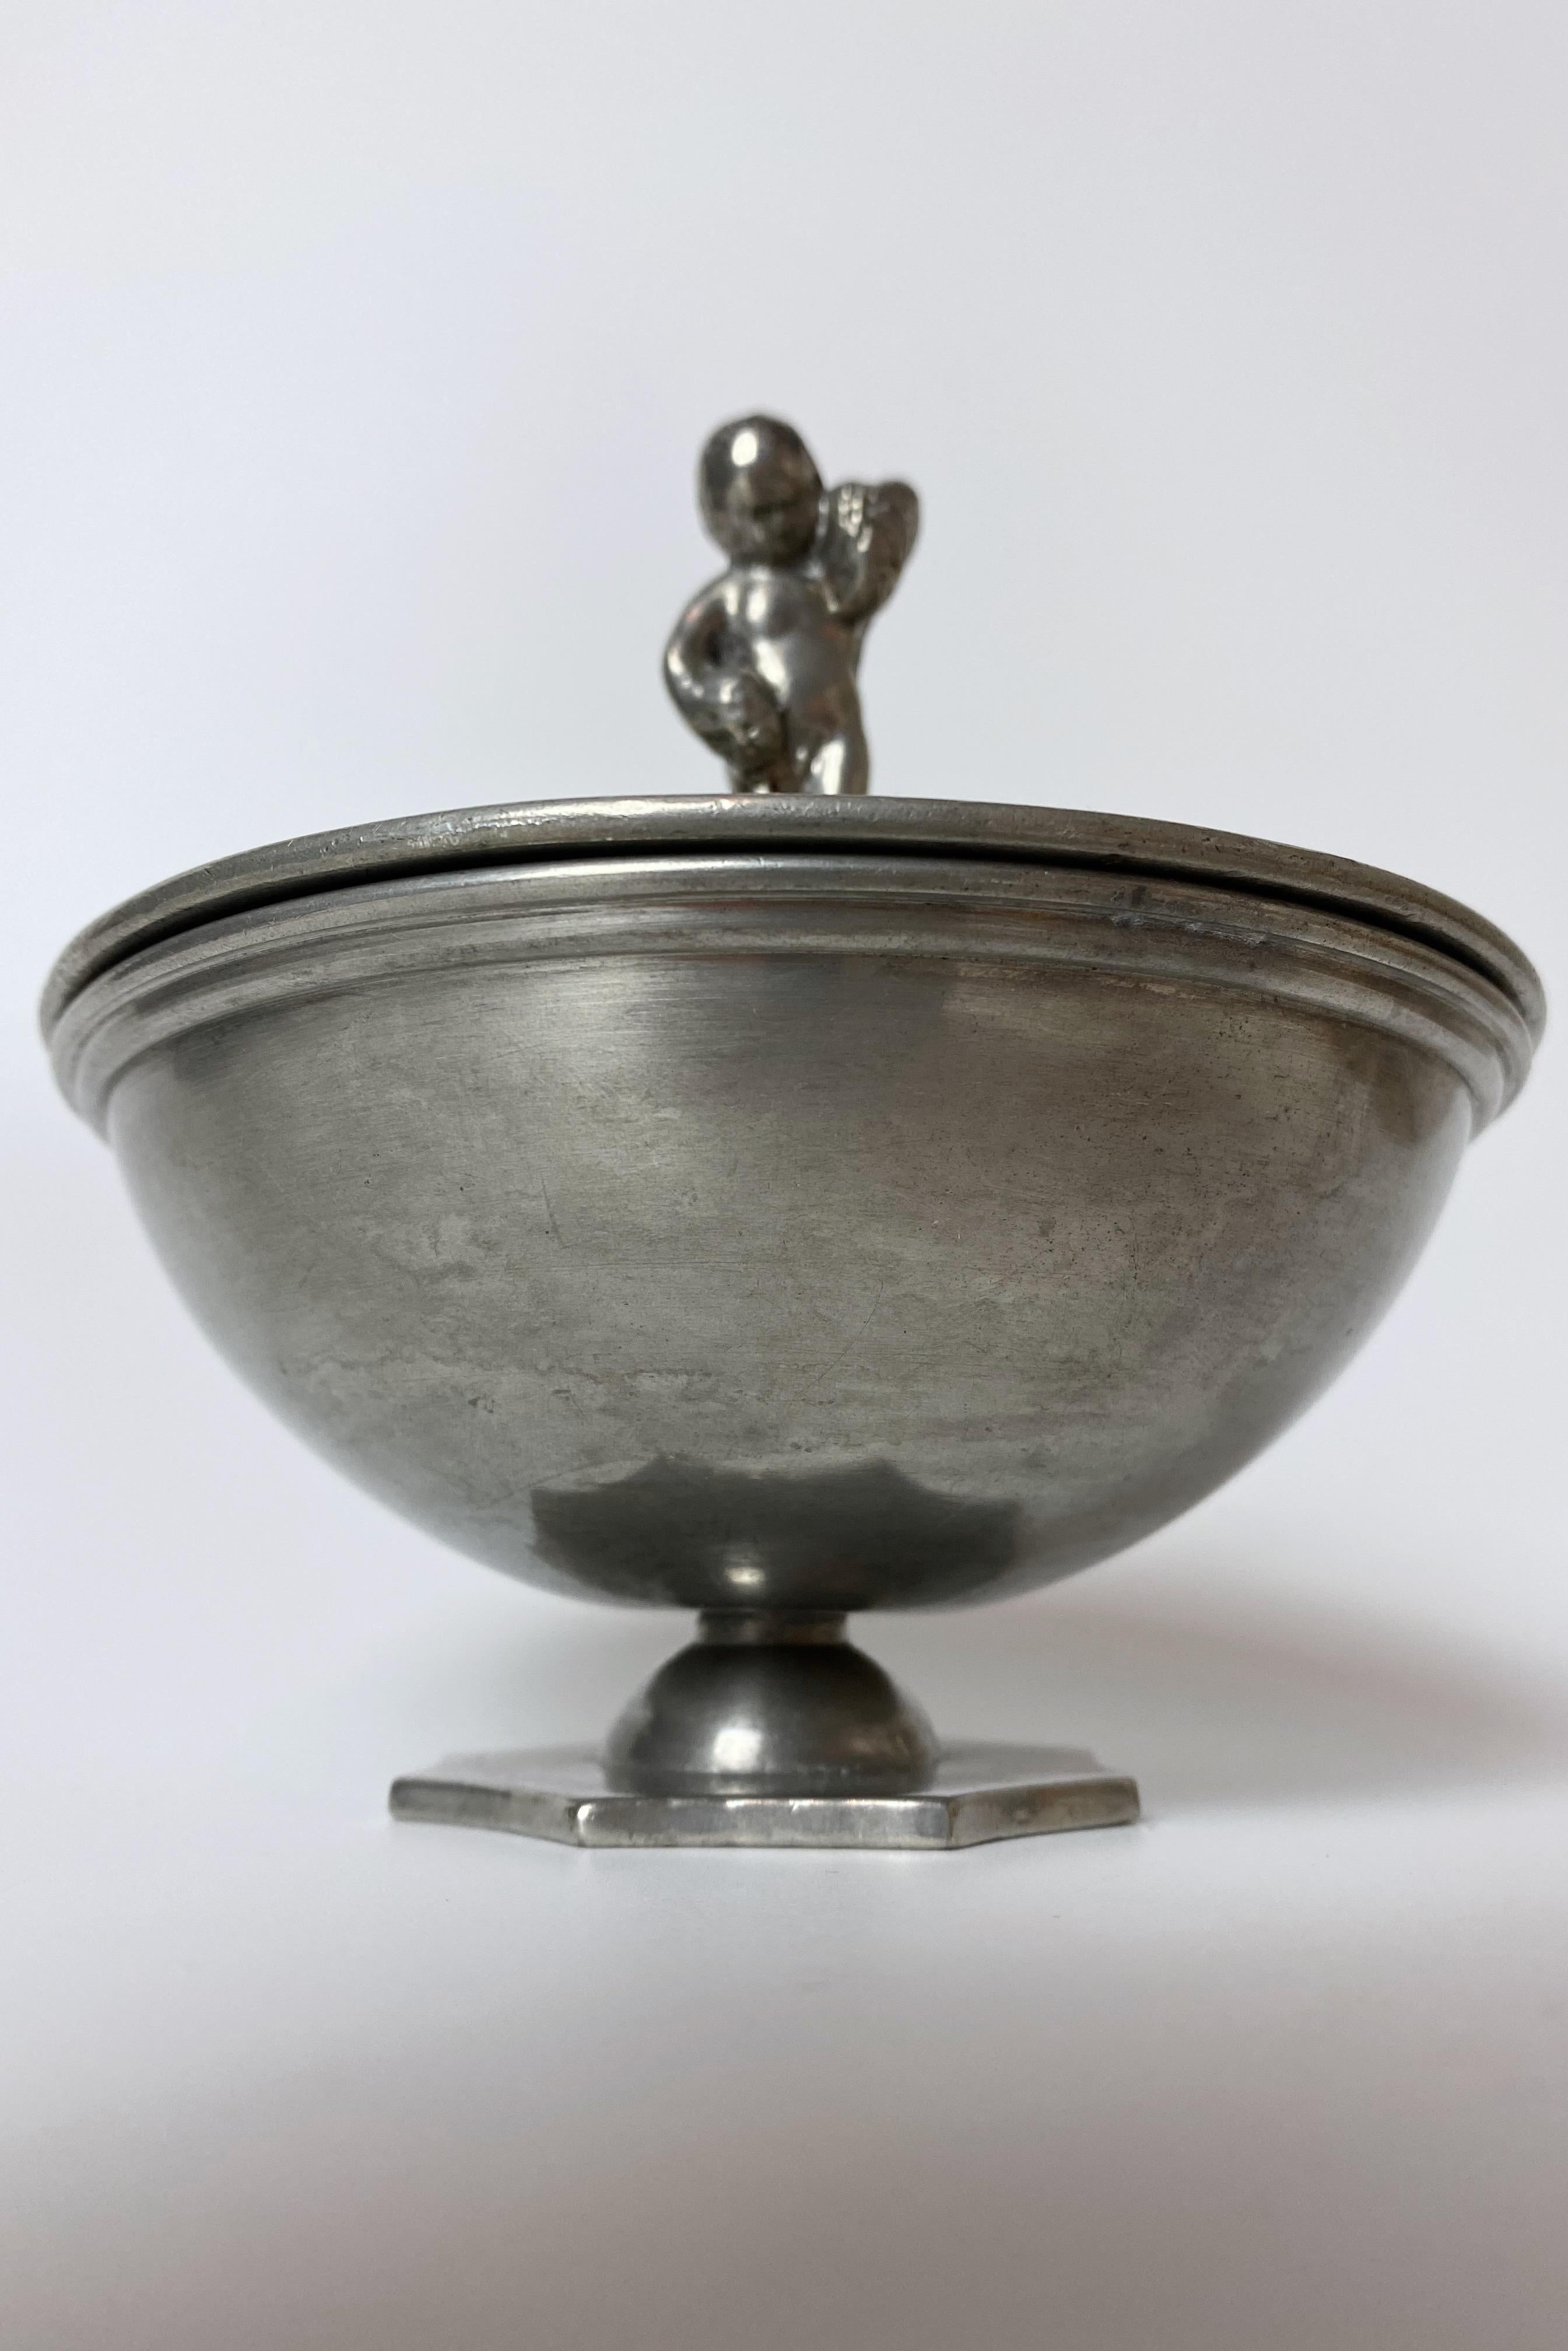 Lovely Swedish Pewter bowl by GAB, Sweden, from 1931. Octagon shaped fot with a rounded bottom and flat lid with a figurine on the top. A great example of the Swedish Grace period with neo classic influences. Age appropriate wear to the